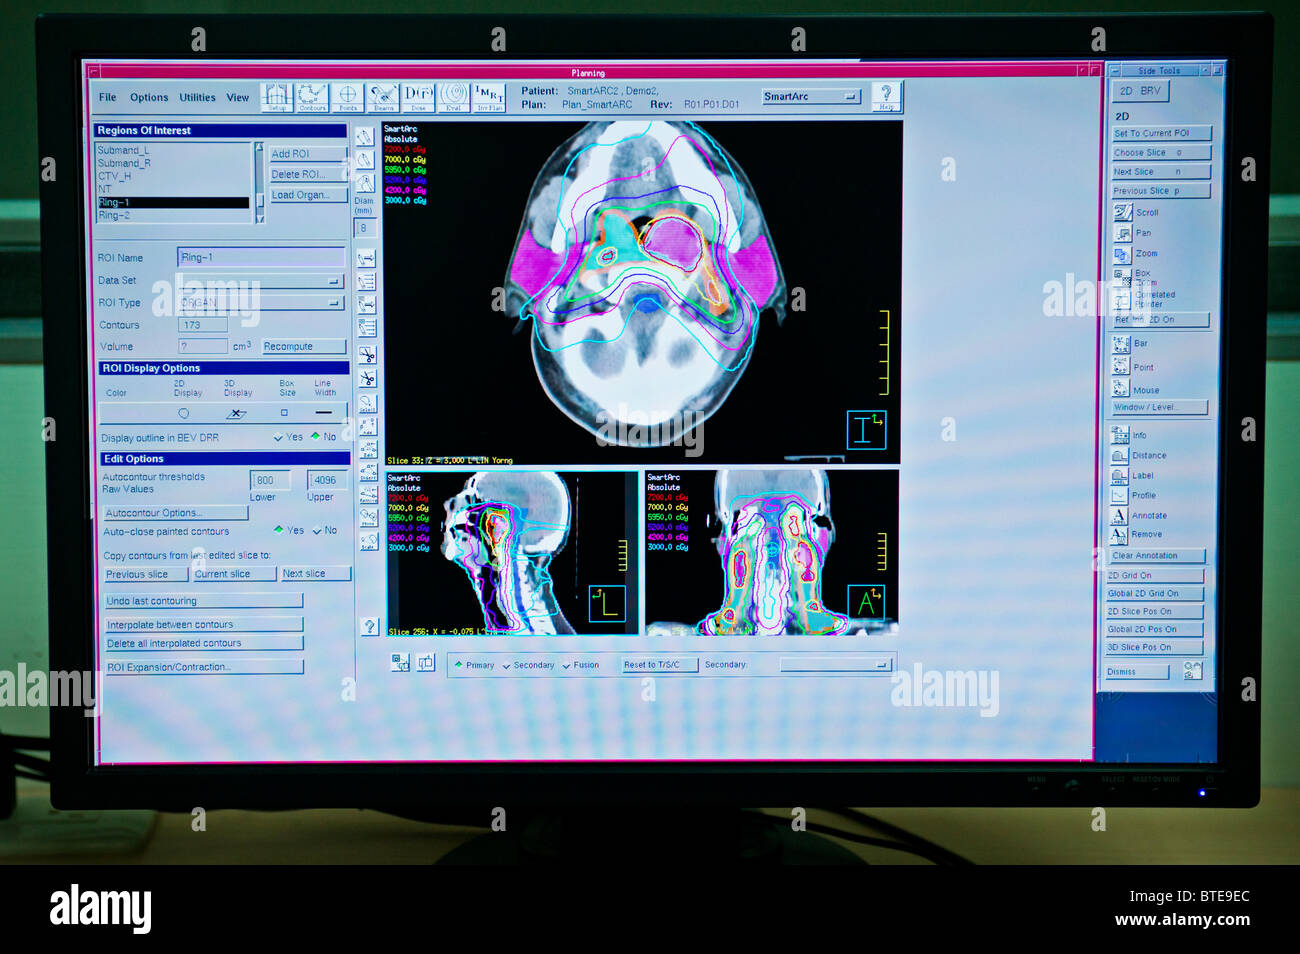 Computer monitor in hospital oncology department showing CT images Stock Photo